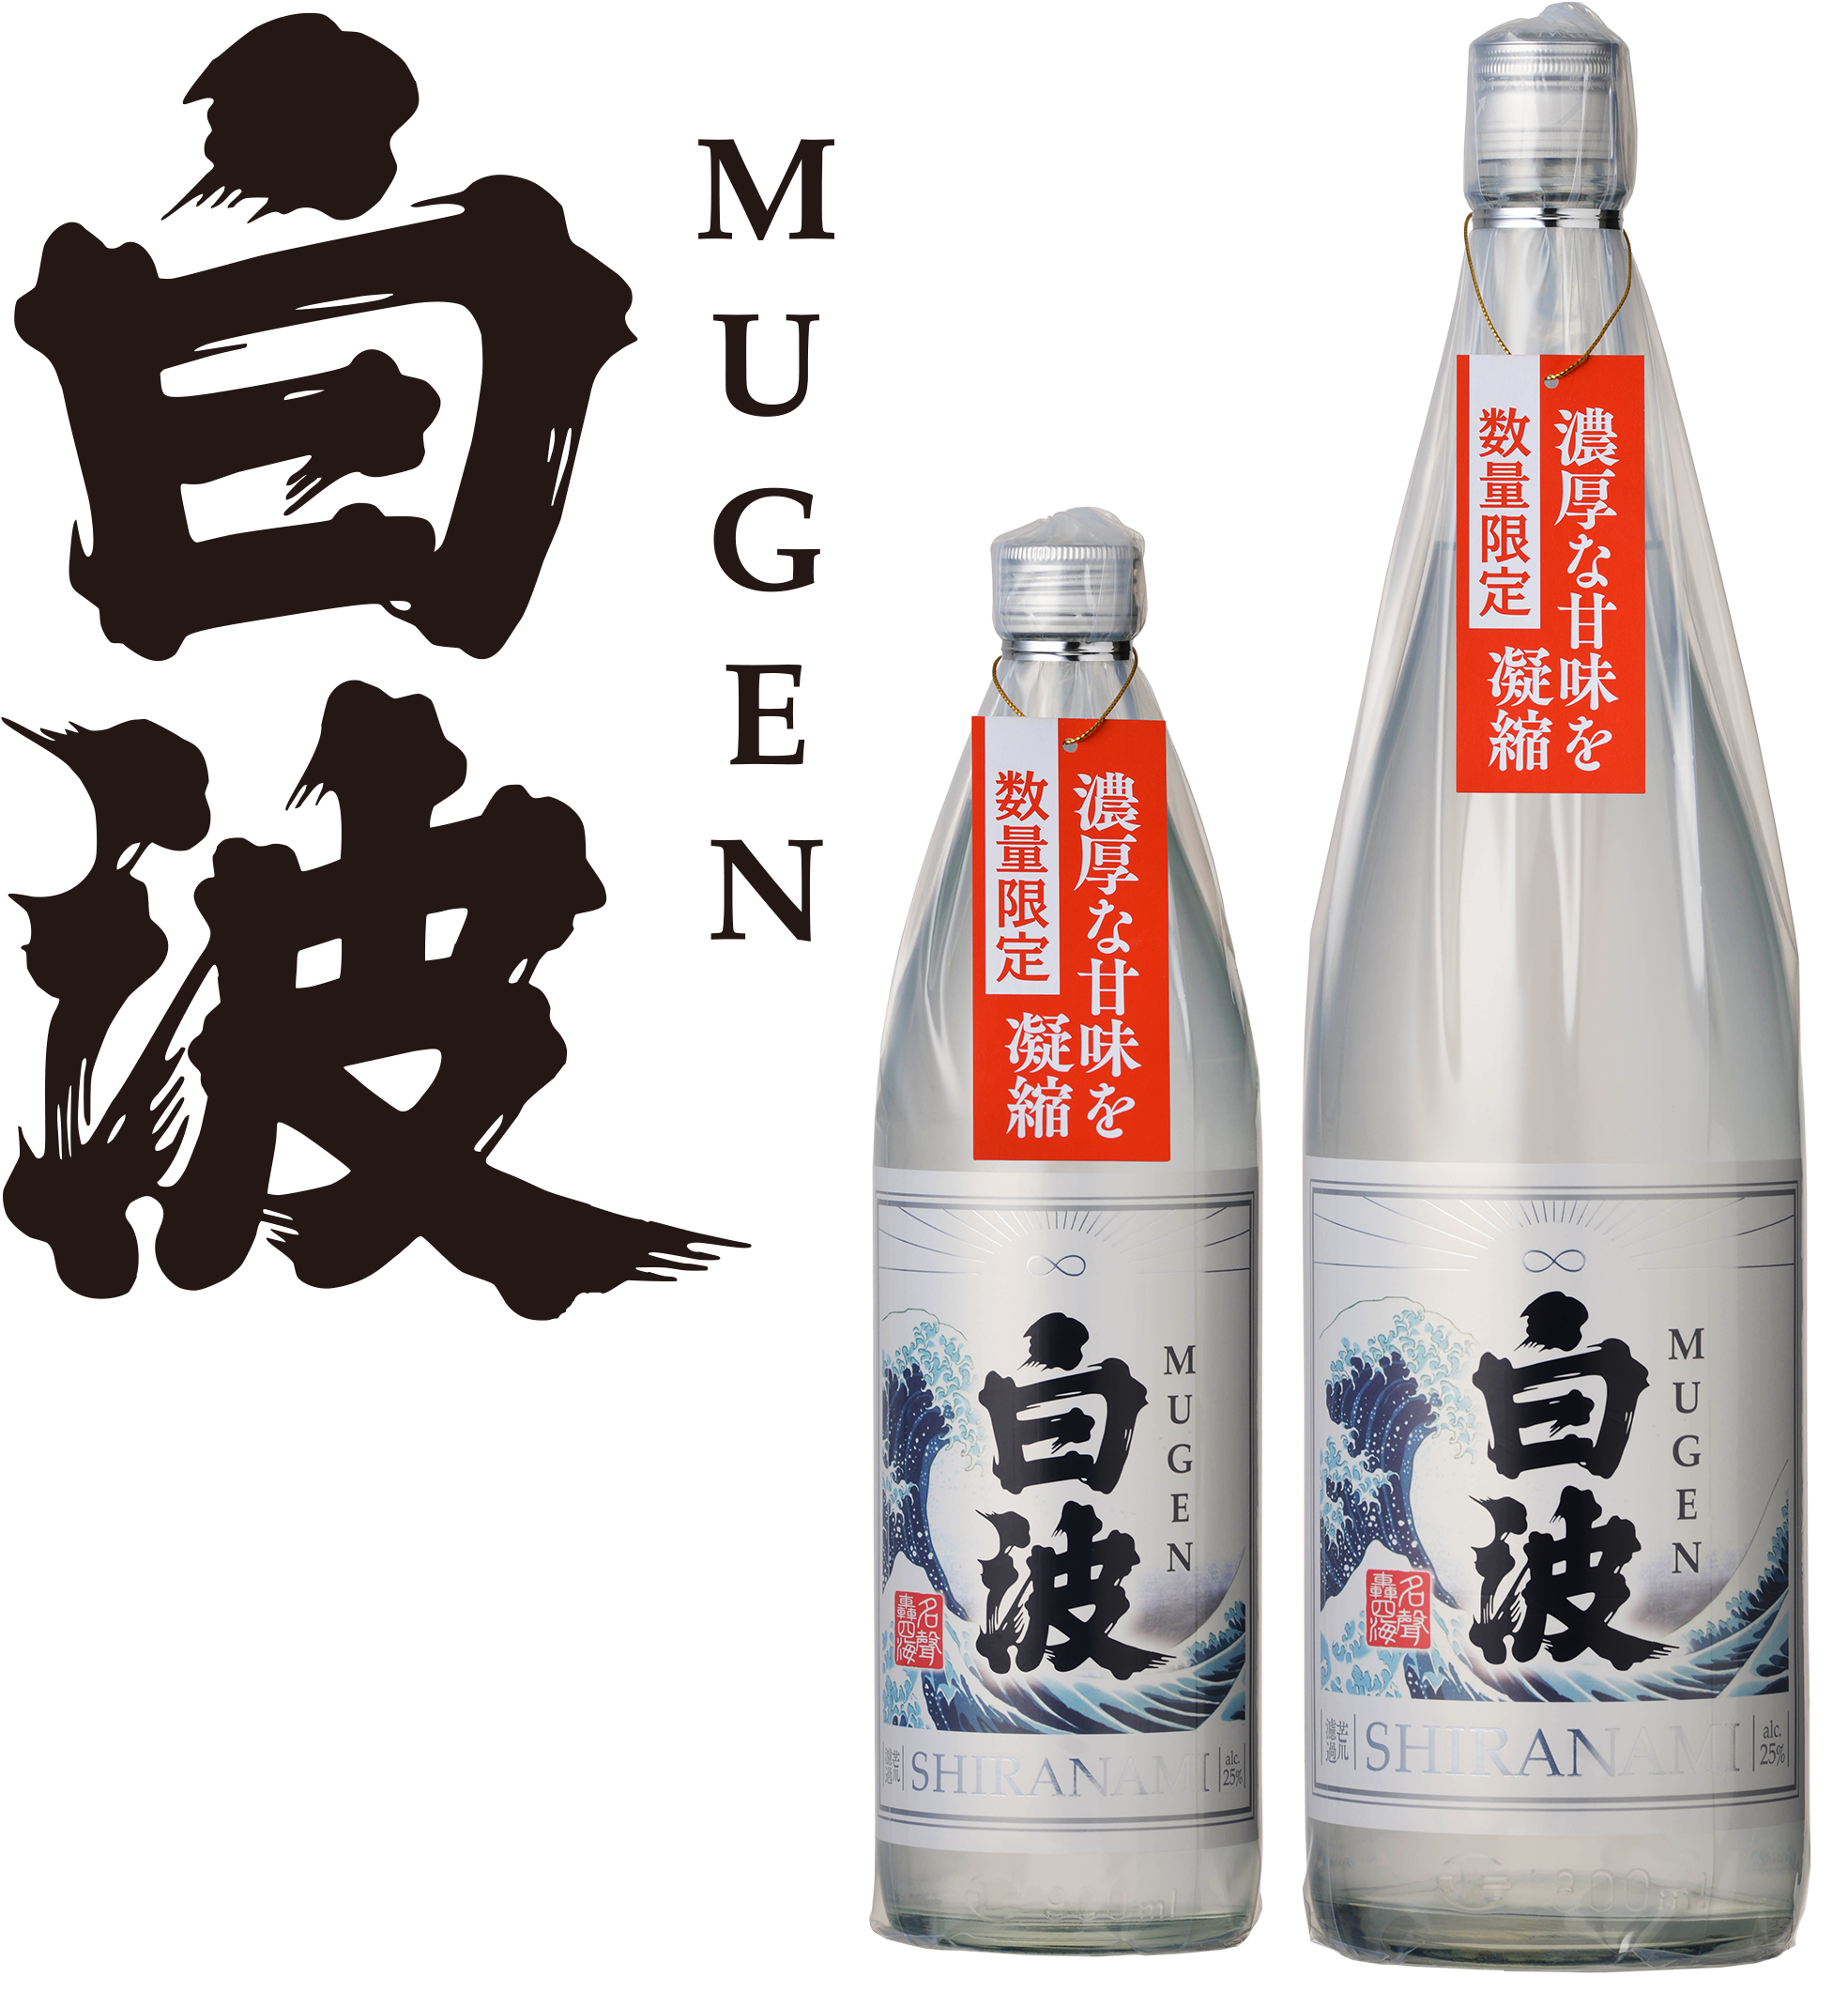 MUGEN白波 数量限定販売のご案内 - 薩摩酒造株式会社